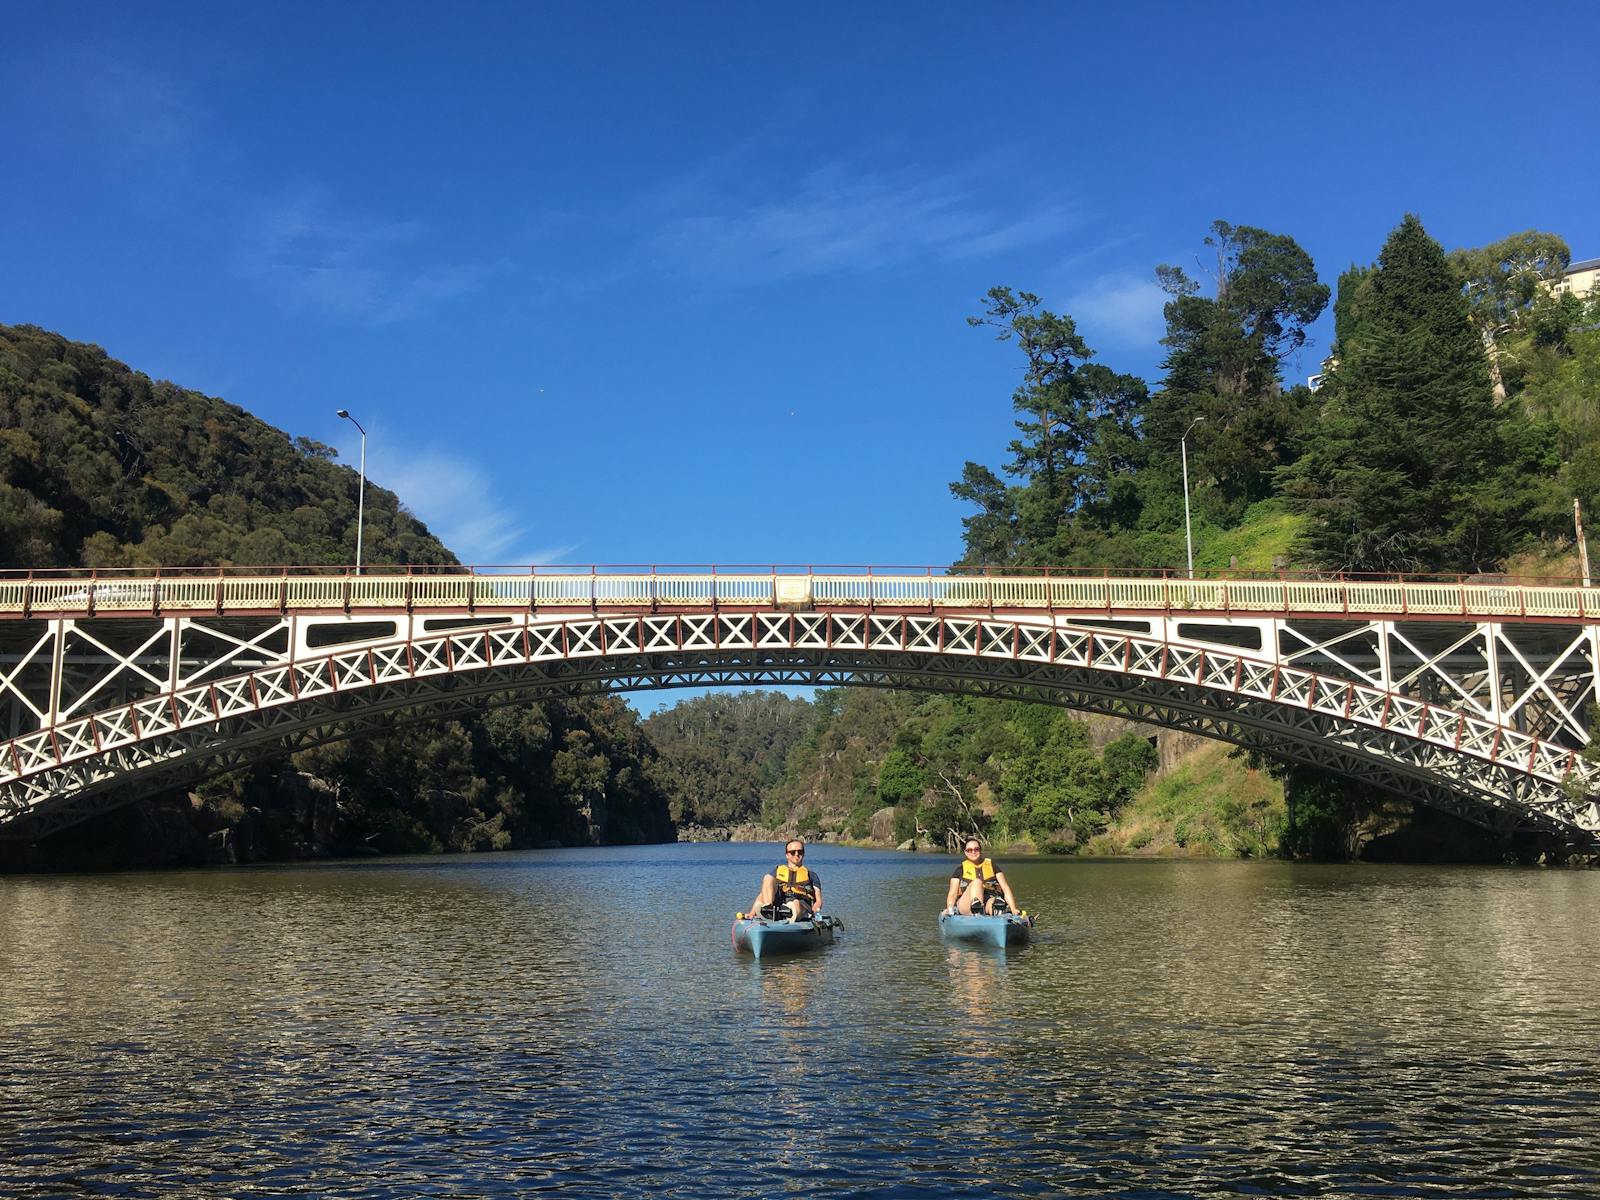 Two people in two blue pedal power kayaks paddle under an arched iron work bridge in the background